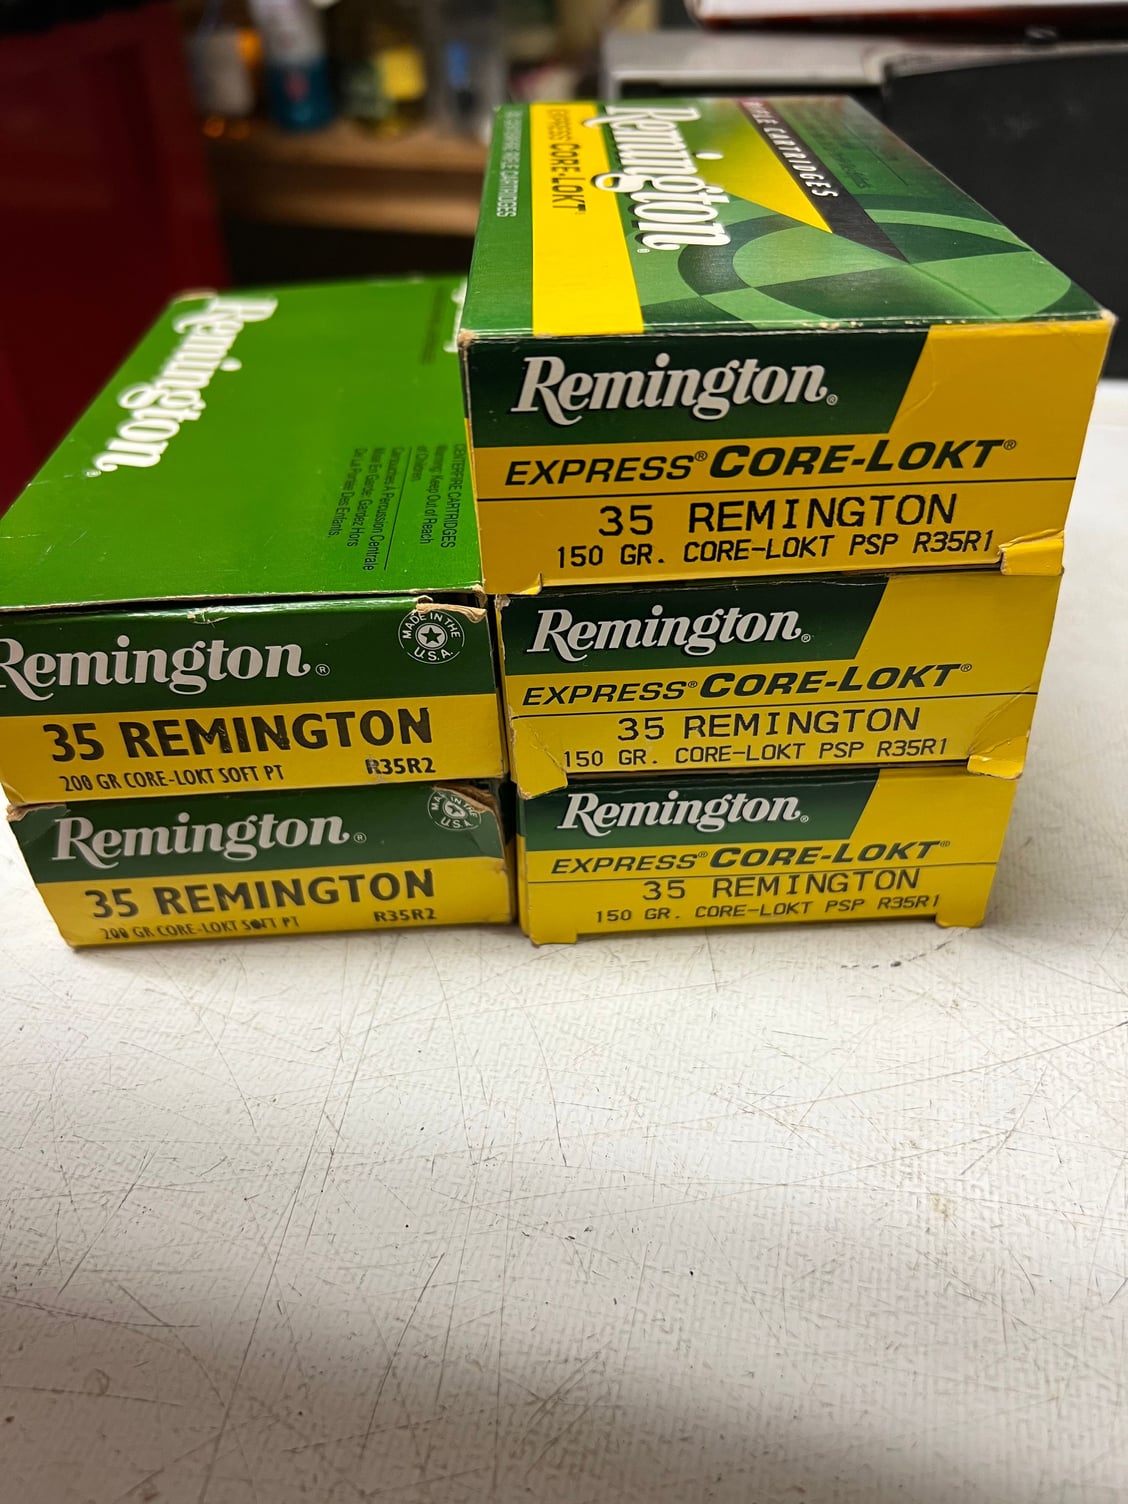 35 Remington ammo - The Hull Truth - Boating and Fishing Forum